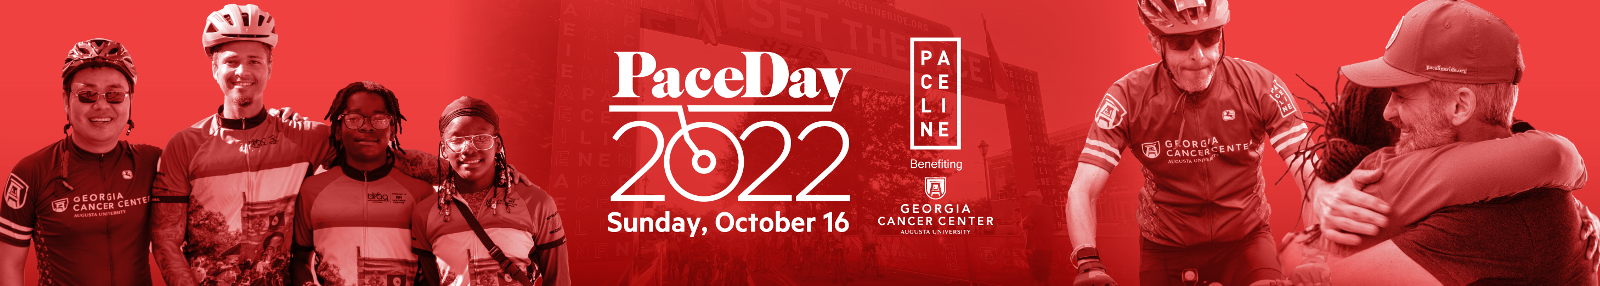 PaceDay 2022, Sunday October 16